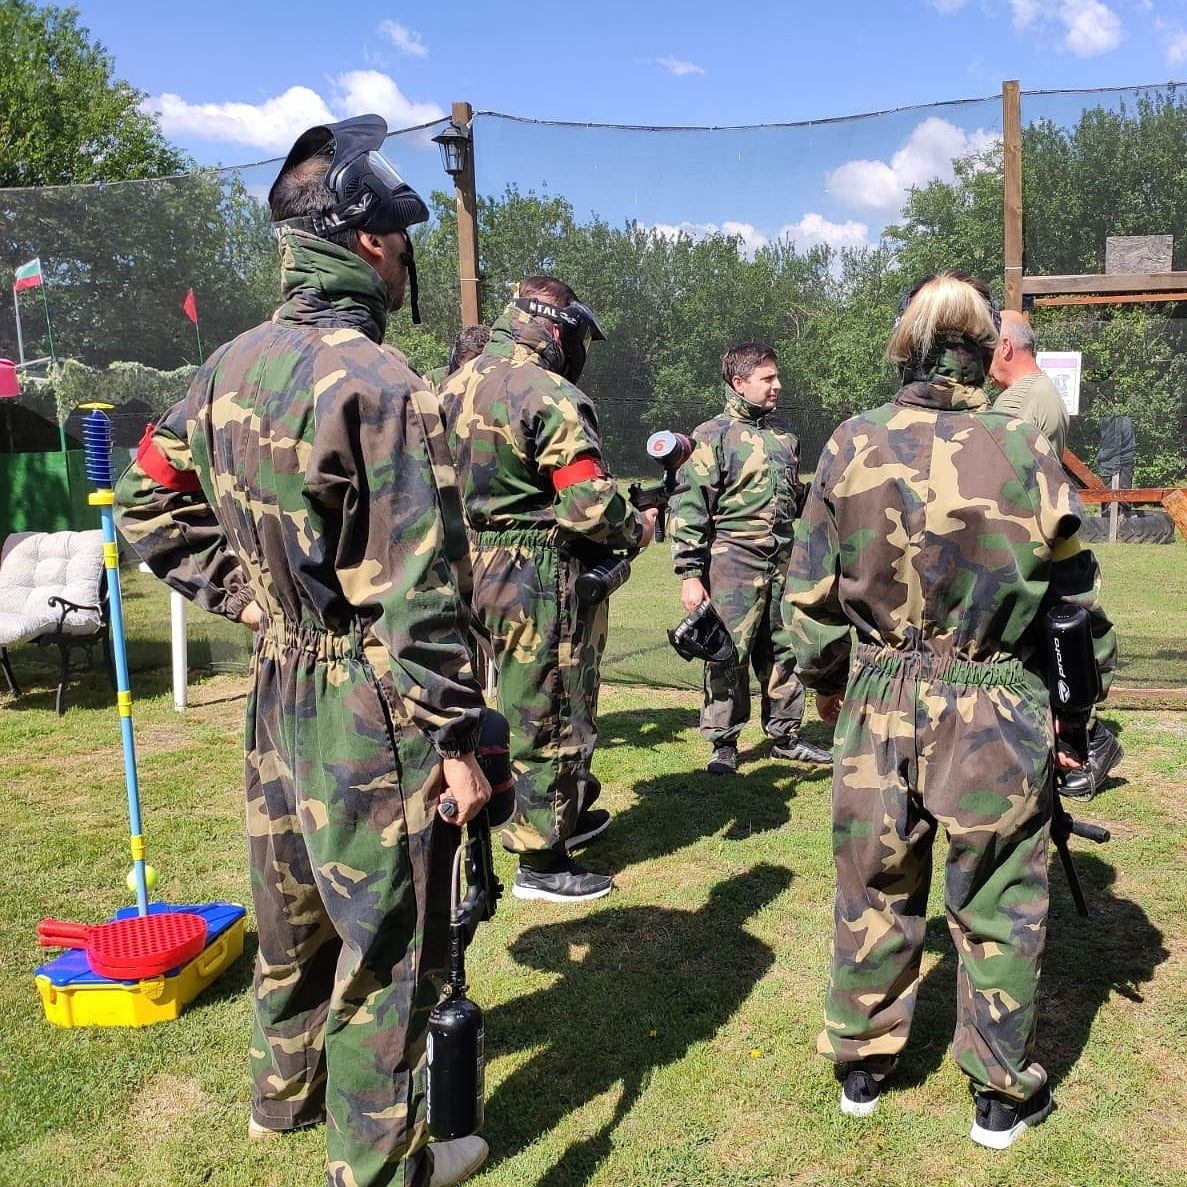 Action day with karting, paintball and barbecue in Sliven